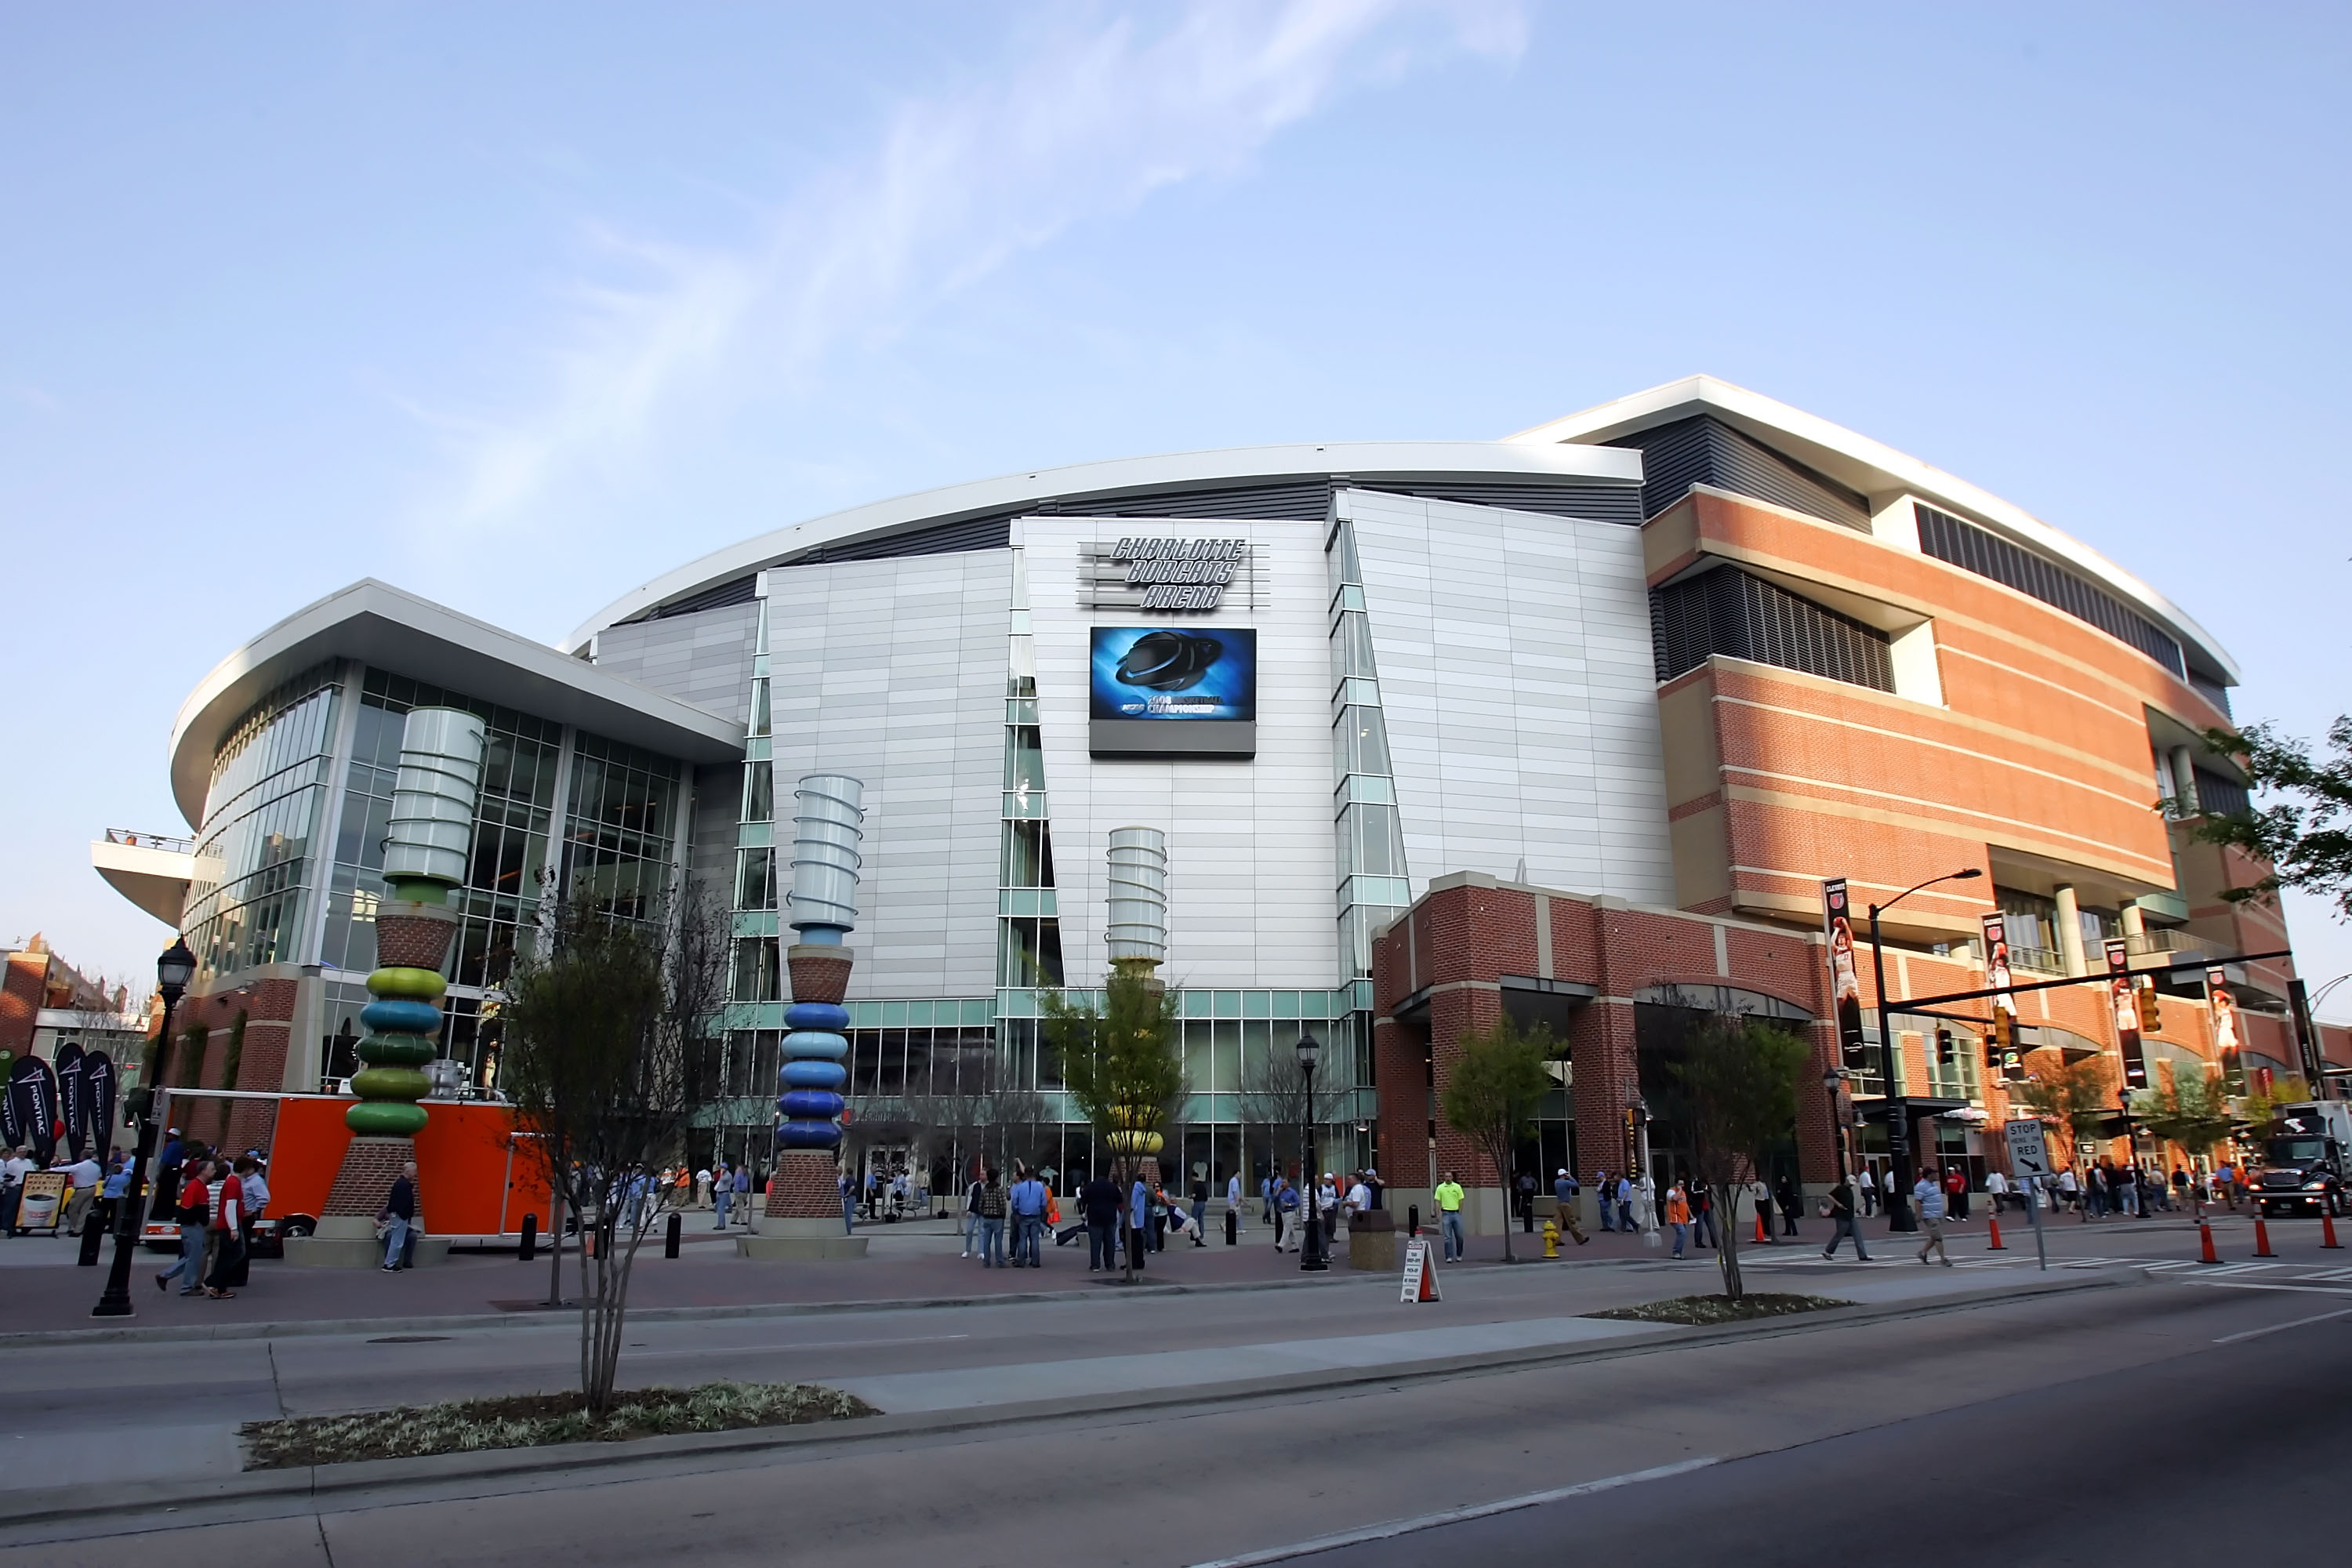 CHARLOTTE, NC - MARCH 27:  A general view of the outside of Bobcats Arena before the start of the 2008 NCAA Men's East Regional Semifinal games on March 27, 2008 in Charlotte, North Carolina.  (Photo by Streeter Lecka/Getty Images)